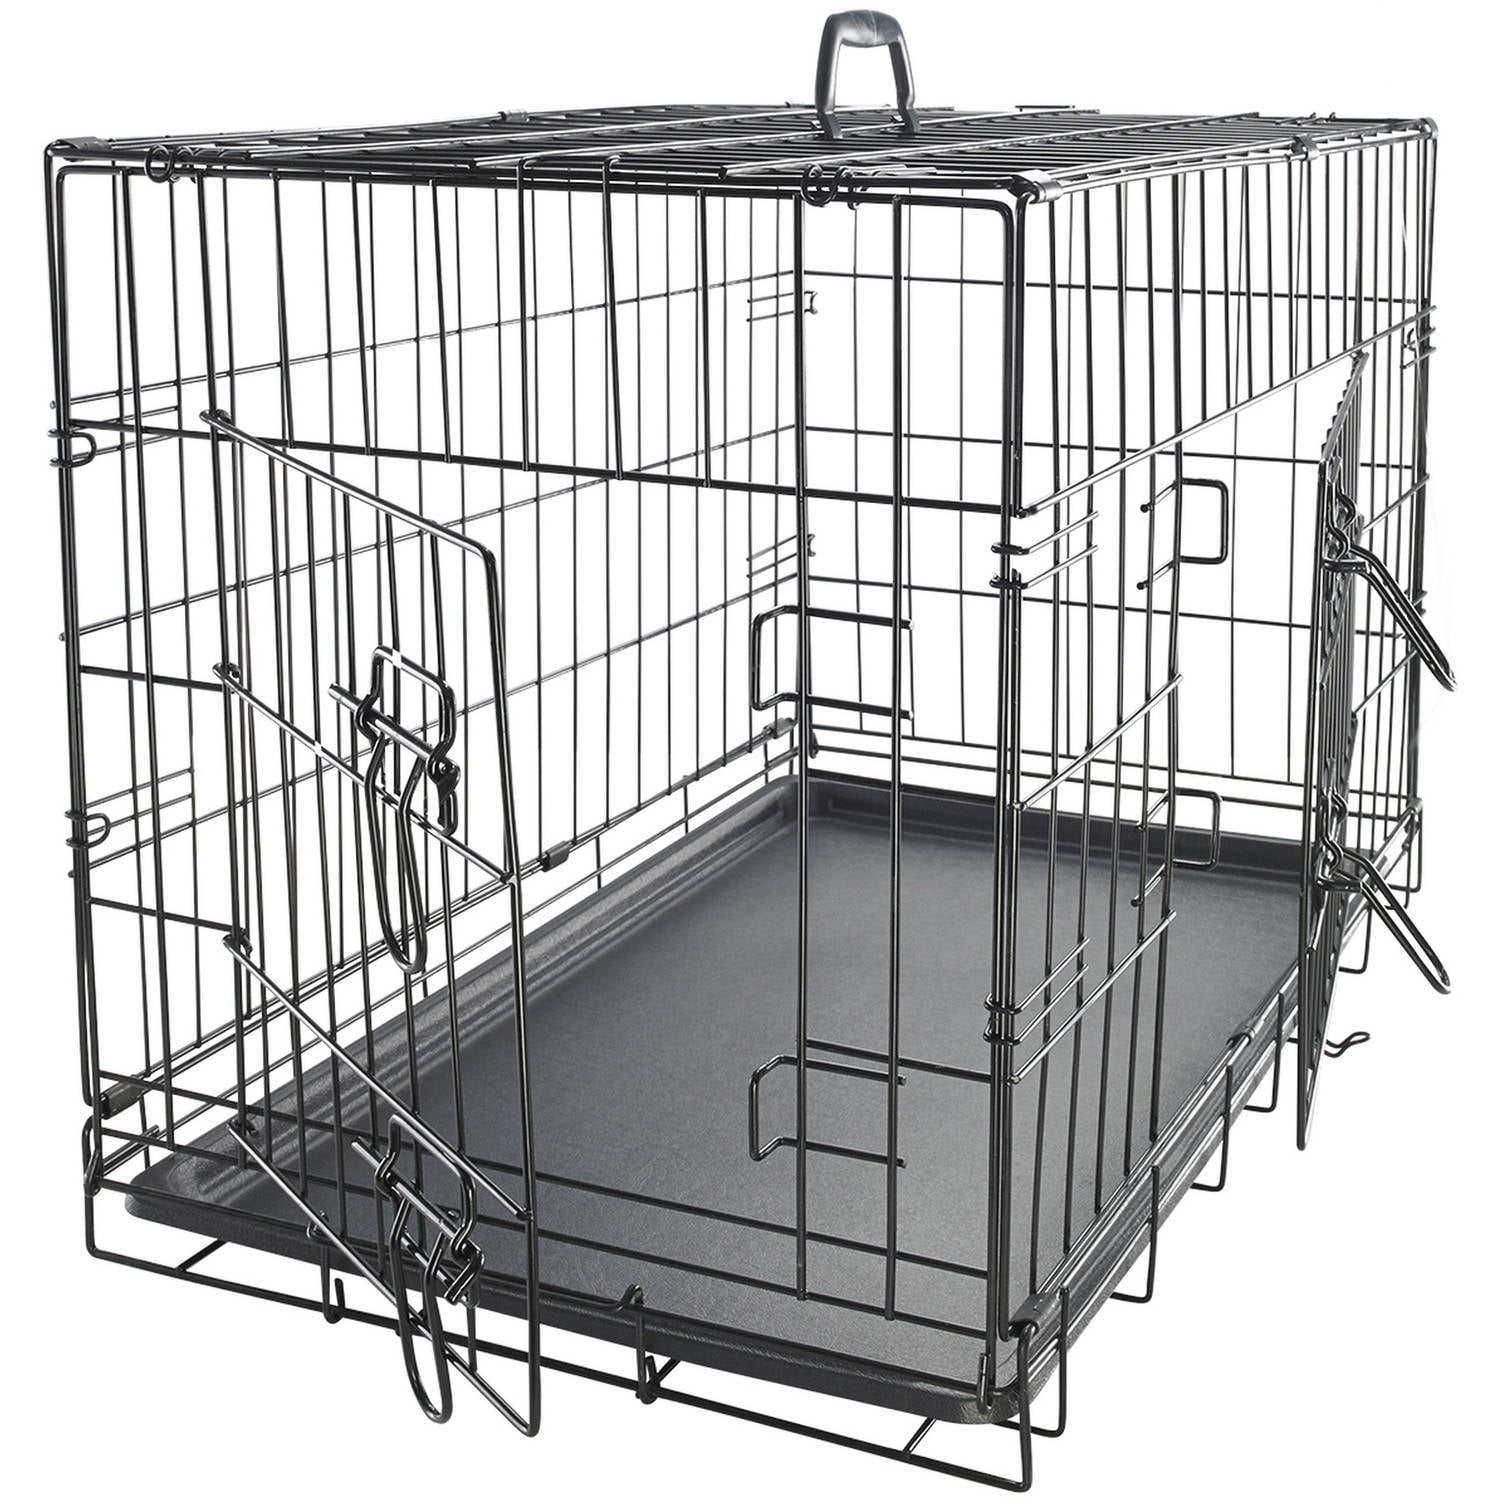 top paw 36 inch dog crate